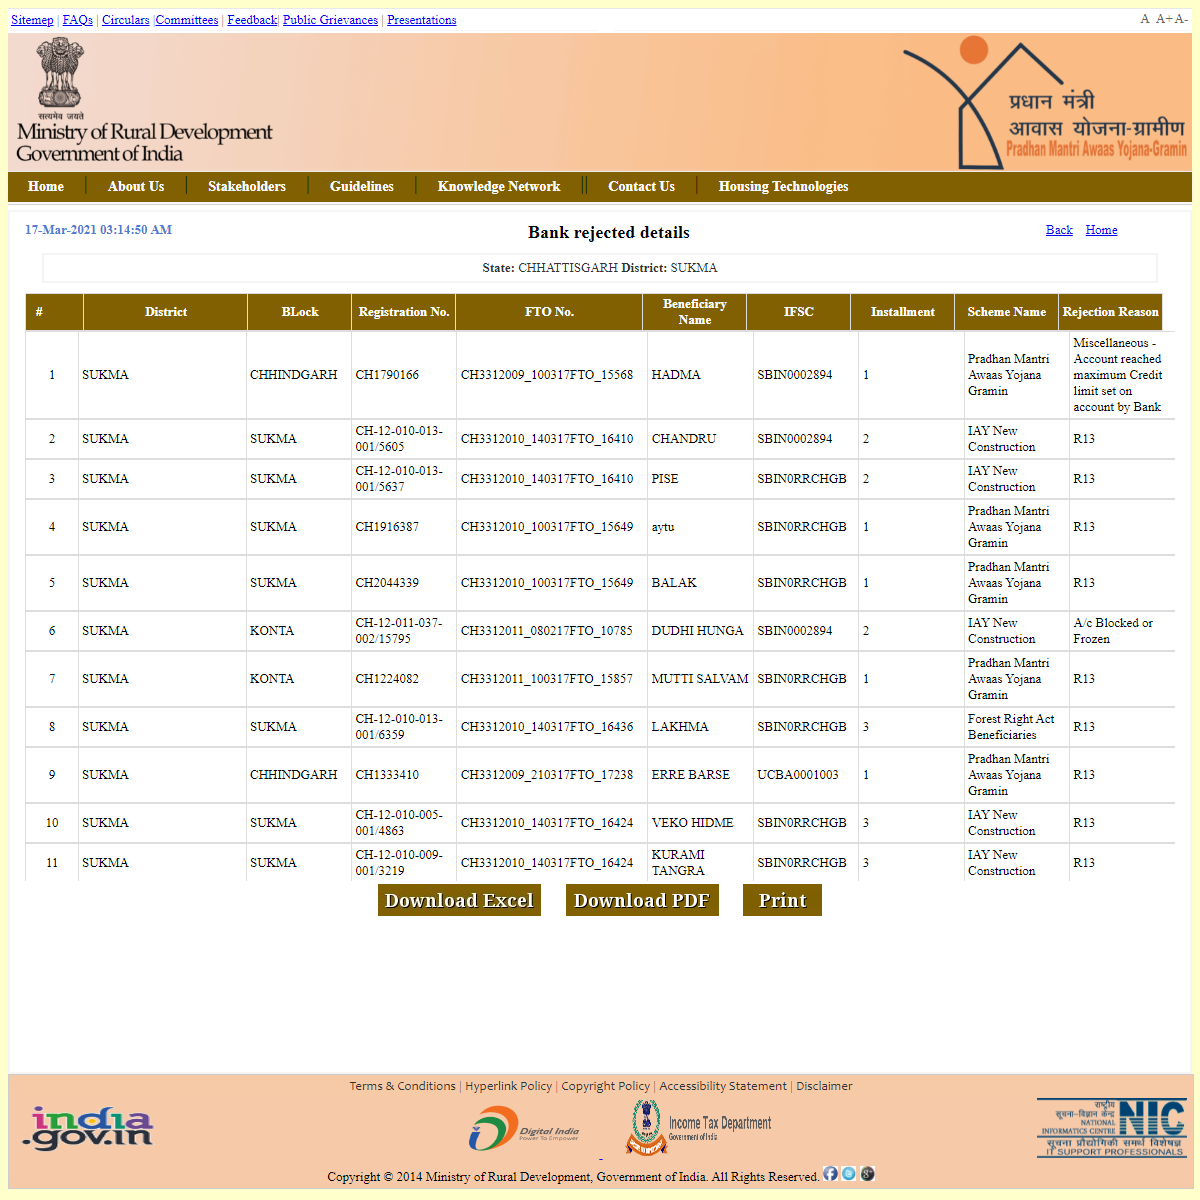 A complete backup of https://rhreporting.nic.in/netiay/EFMSReport/BankRejected_Details_Report.aspx?page1=d&StateName=CHHATTISGAR